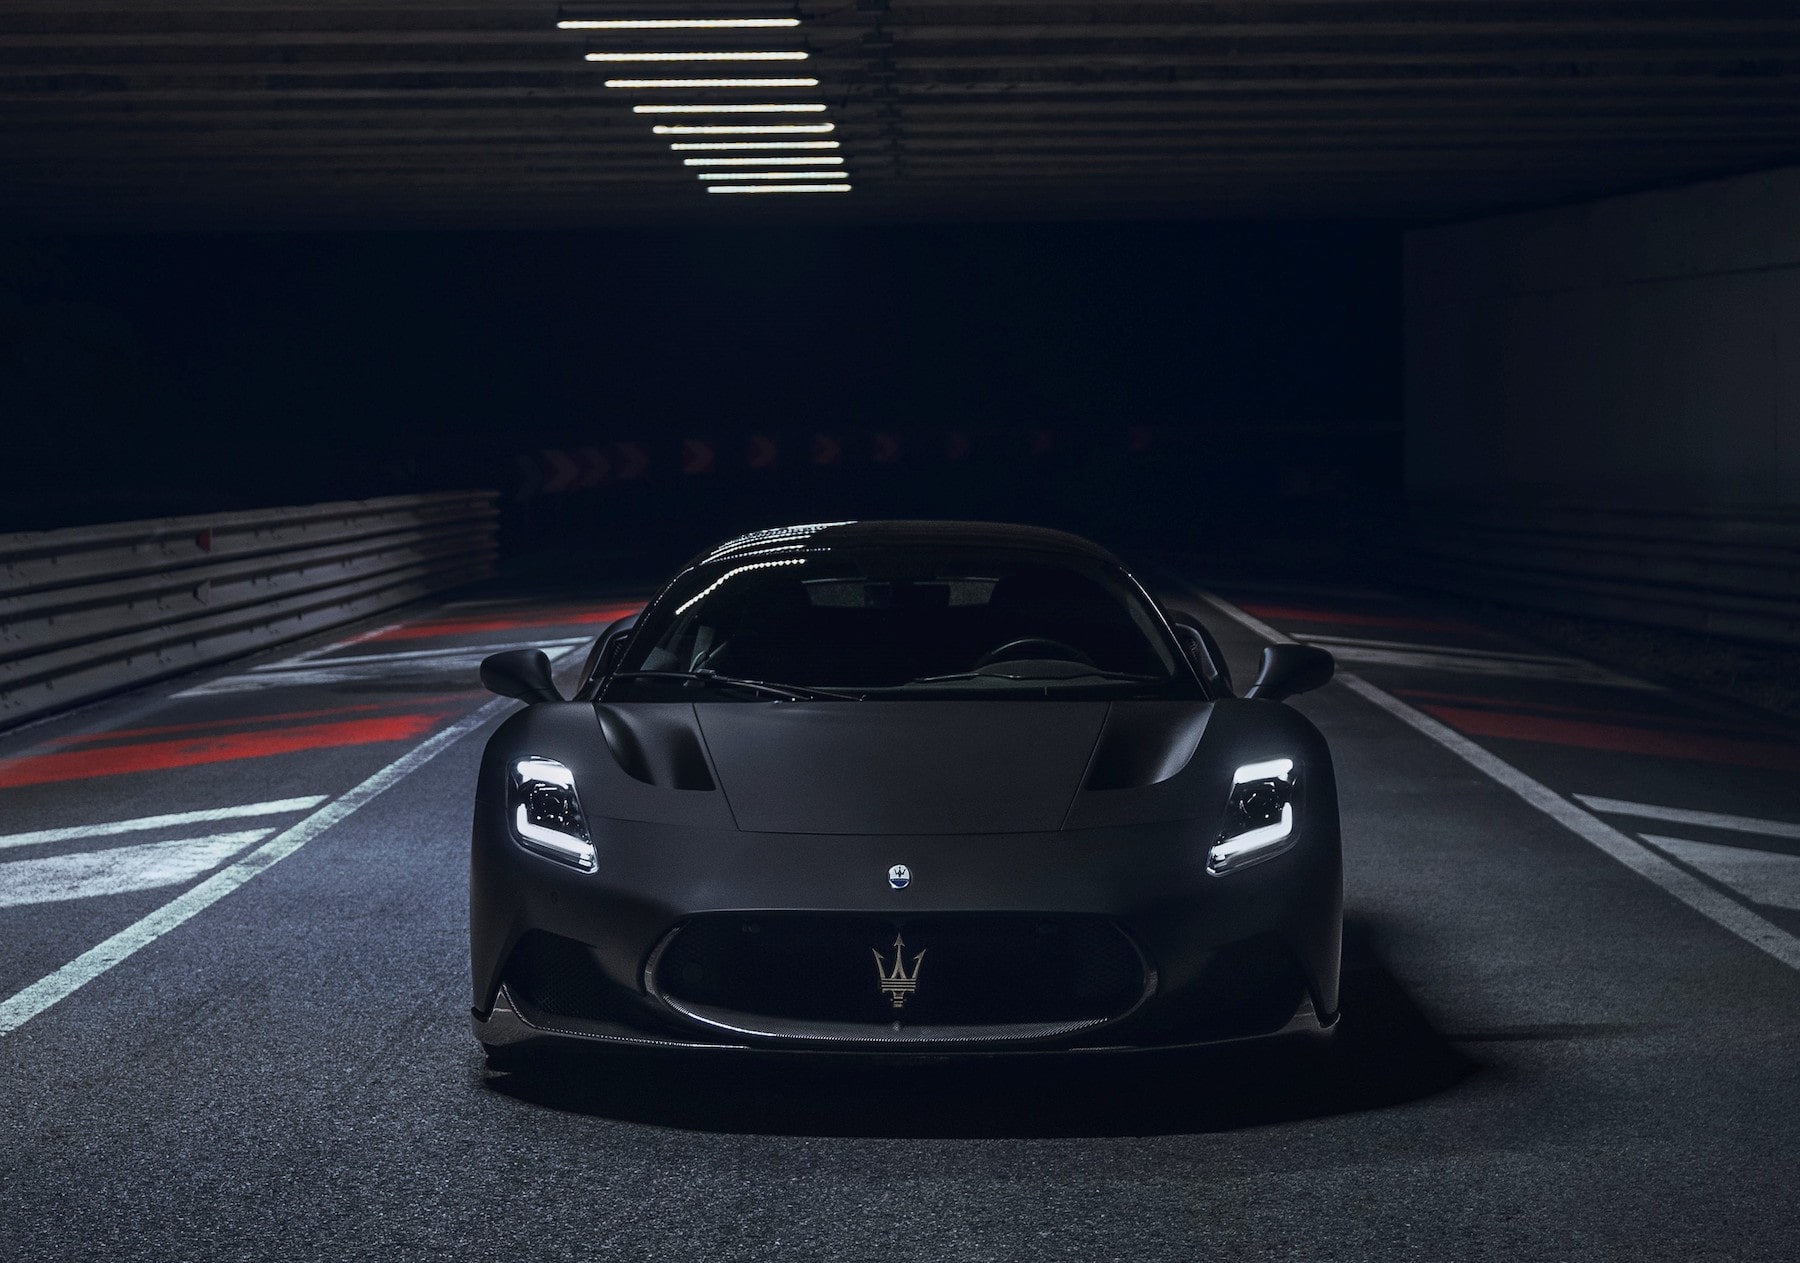 Maserati Launches Blacked-Out MC20 Notte Edition, Limited to 50 Units Globally